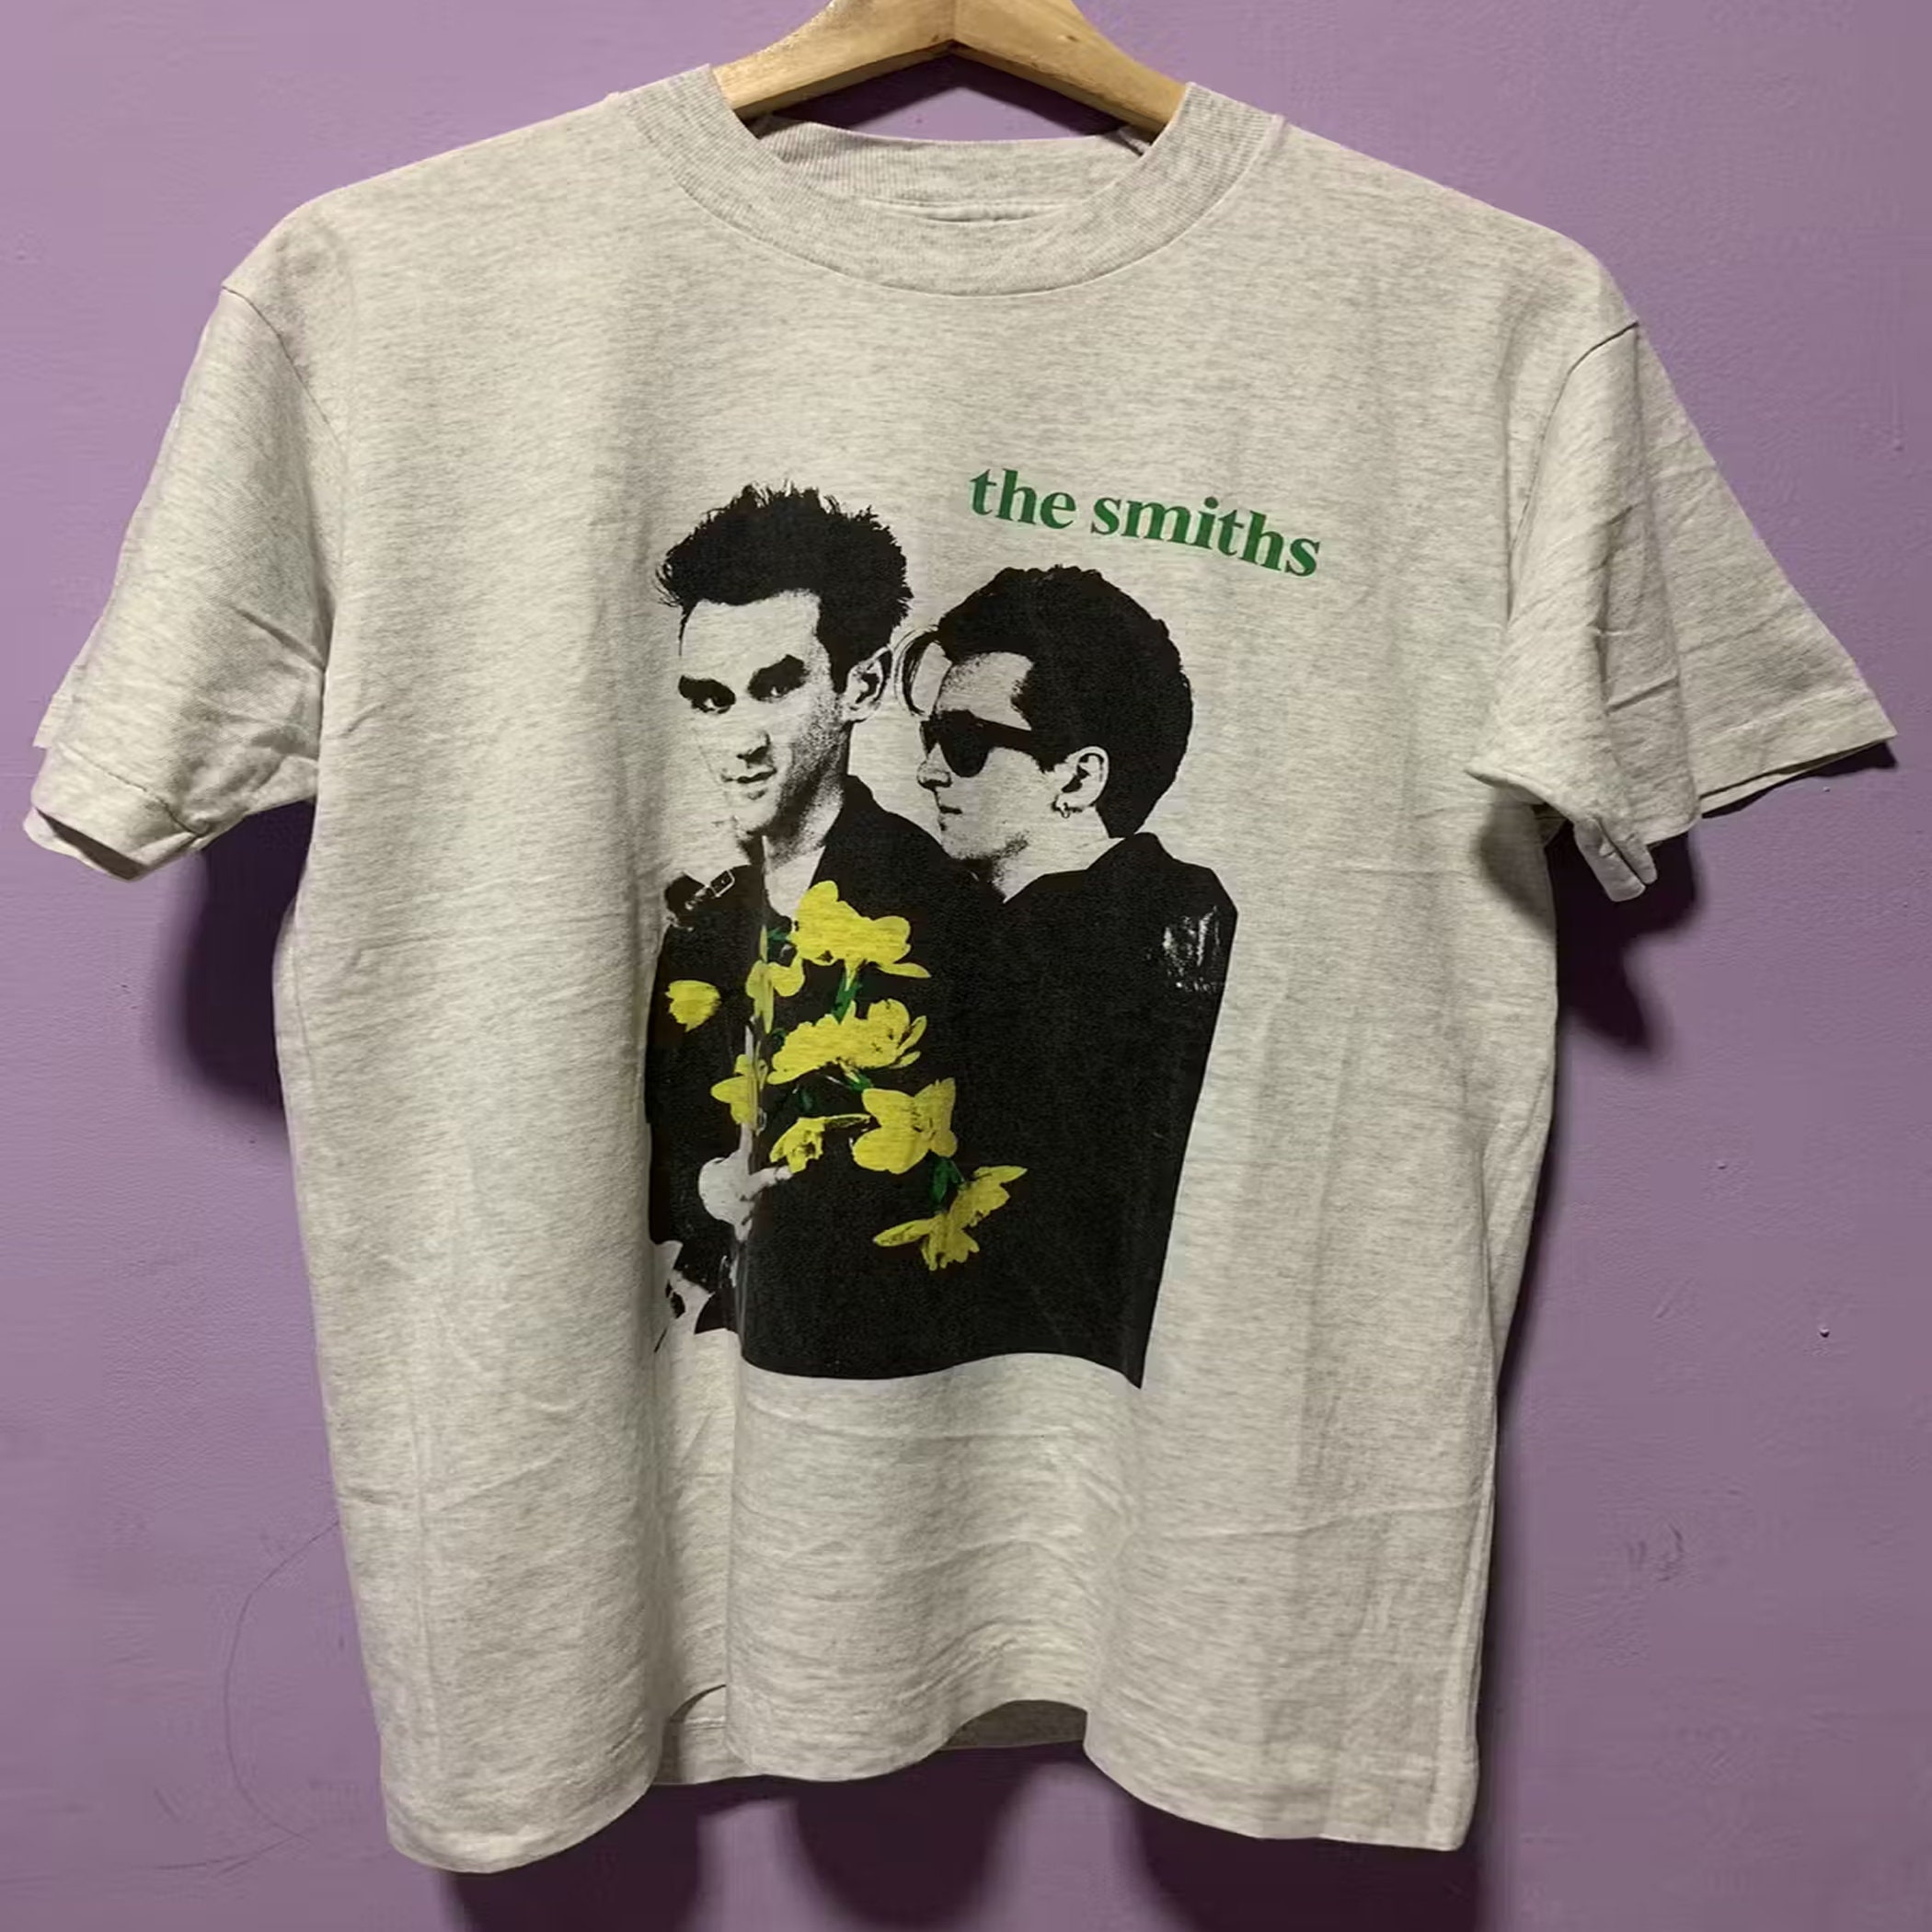 The Smiths T-Shirt, Vintage The Smiths Shirt, The Smiths Rock Band T-shirt, 90s Rock Band Shirt